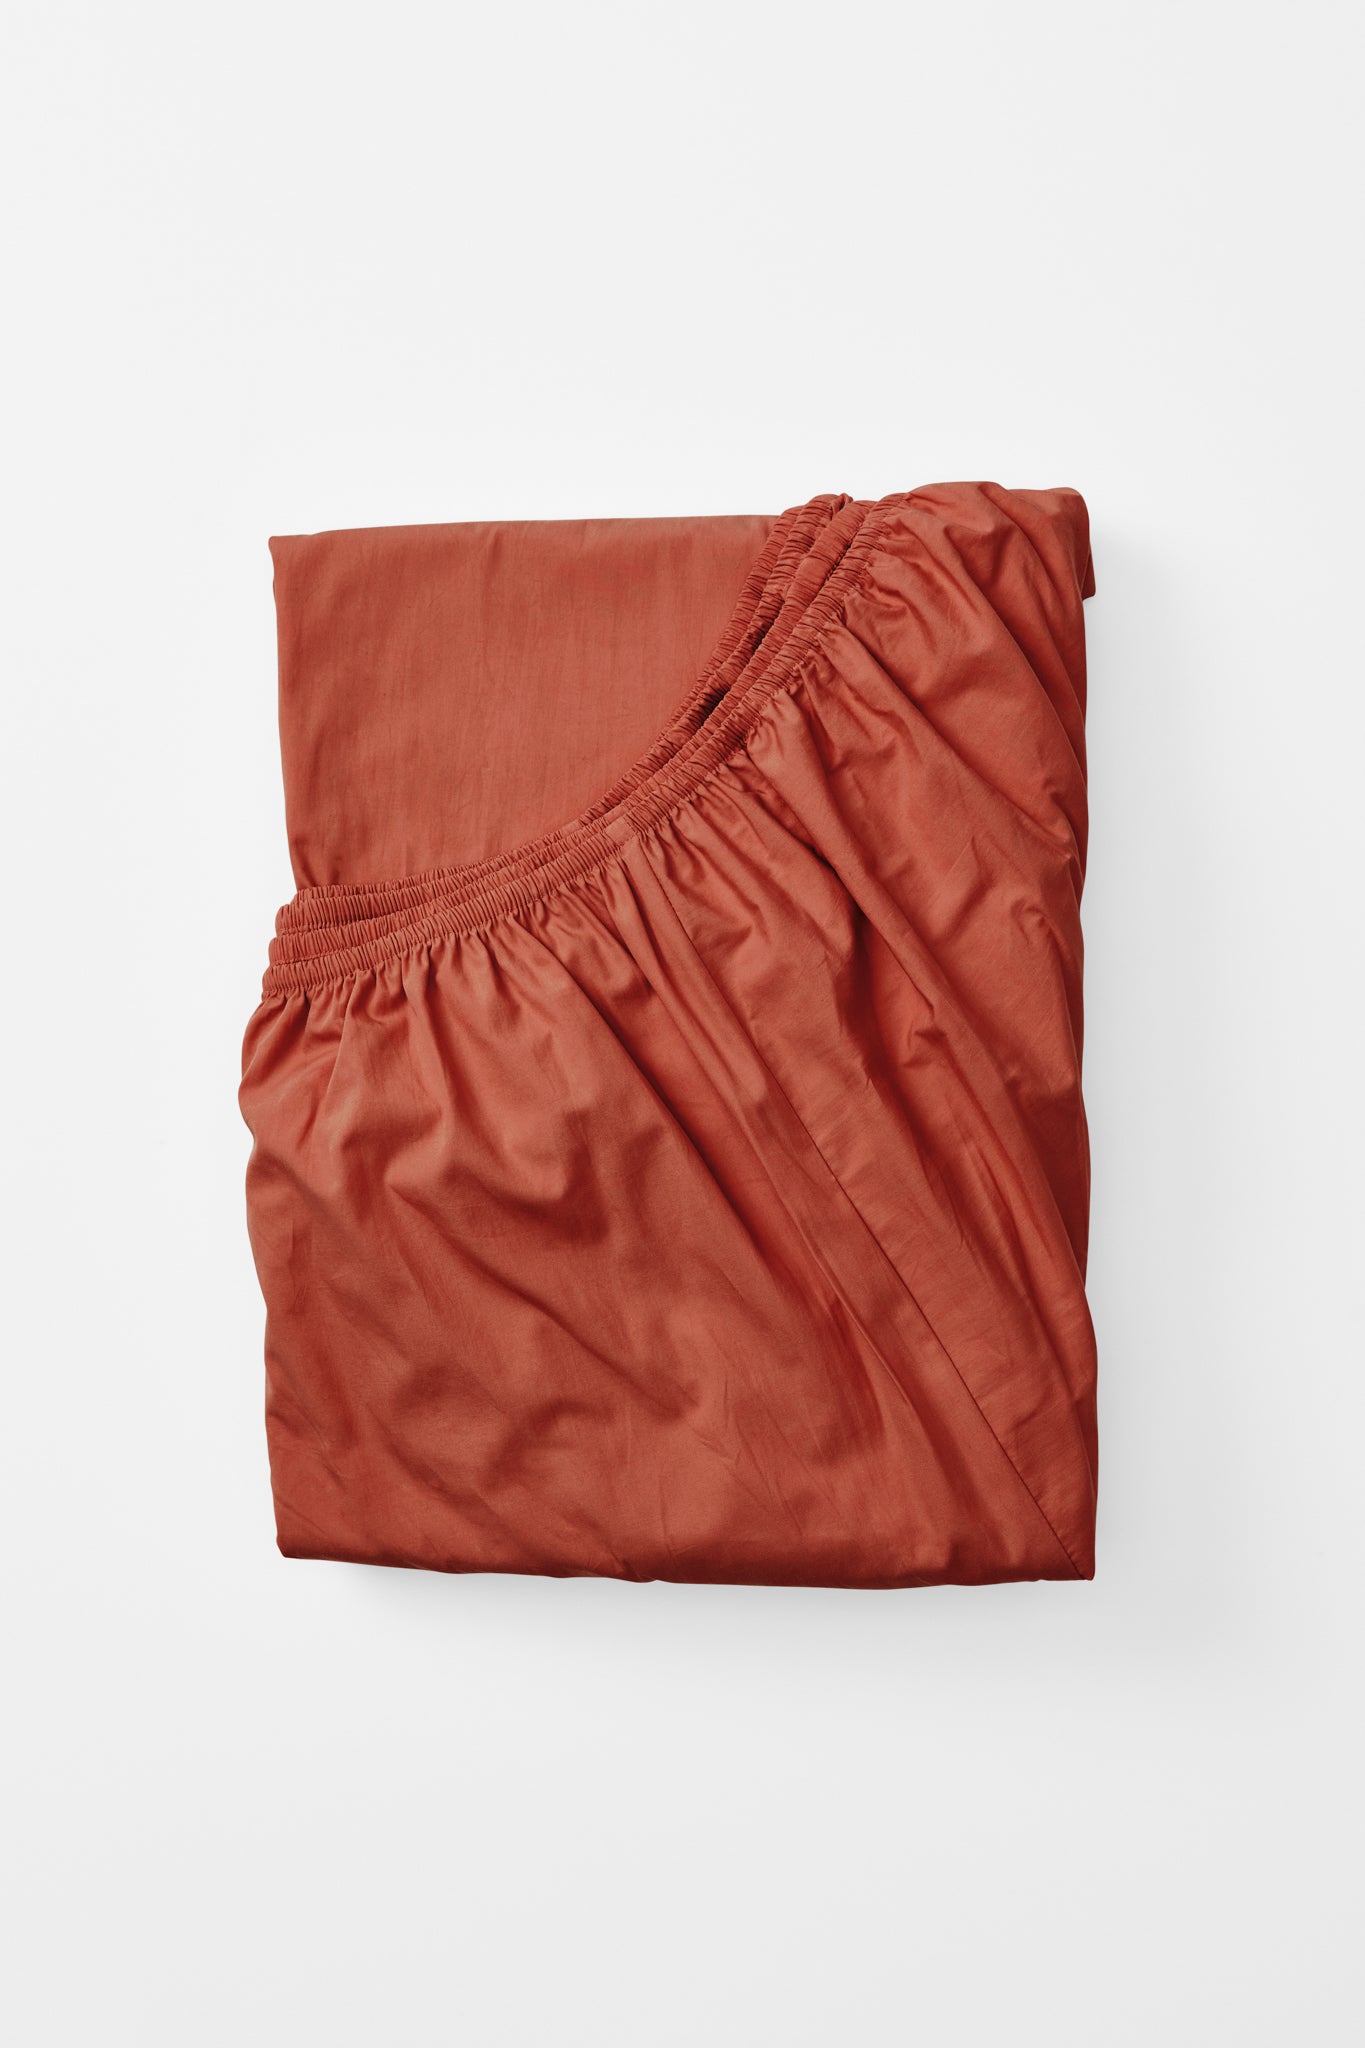 Fitted Sheet in Ochre Red